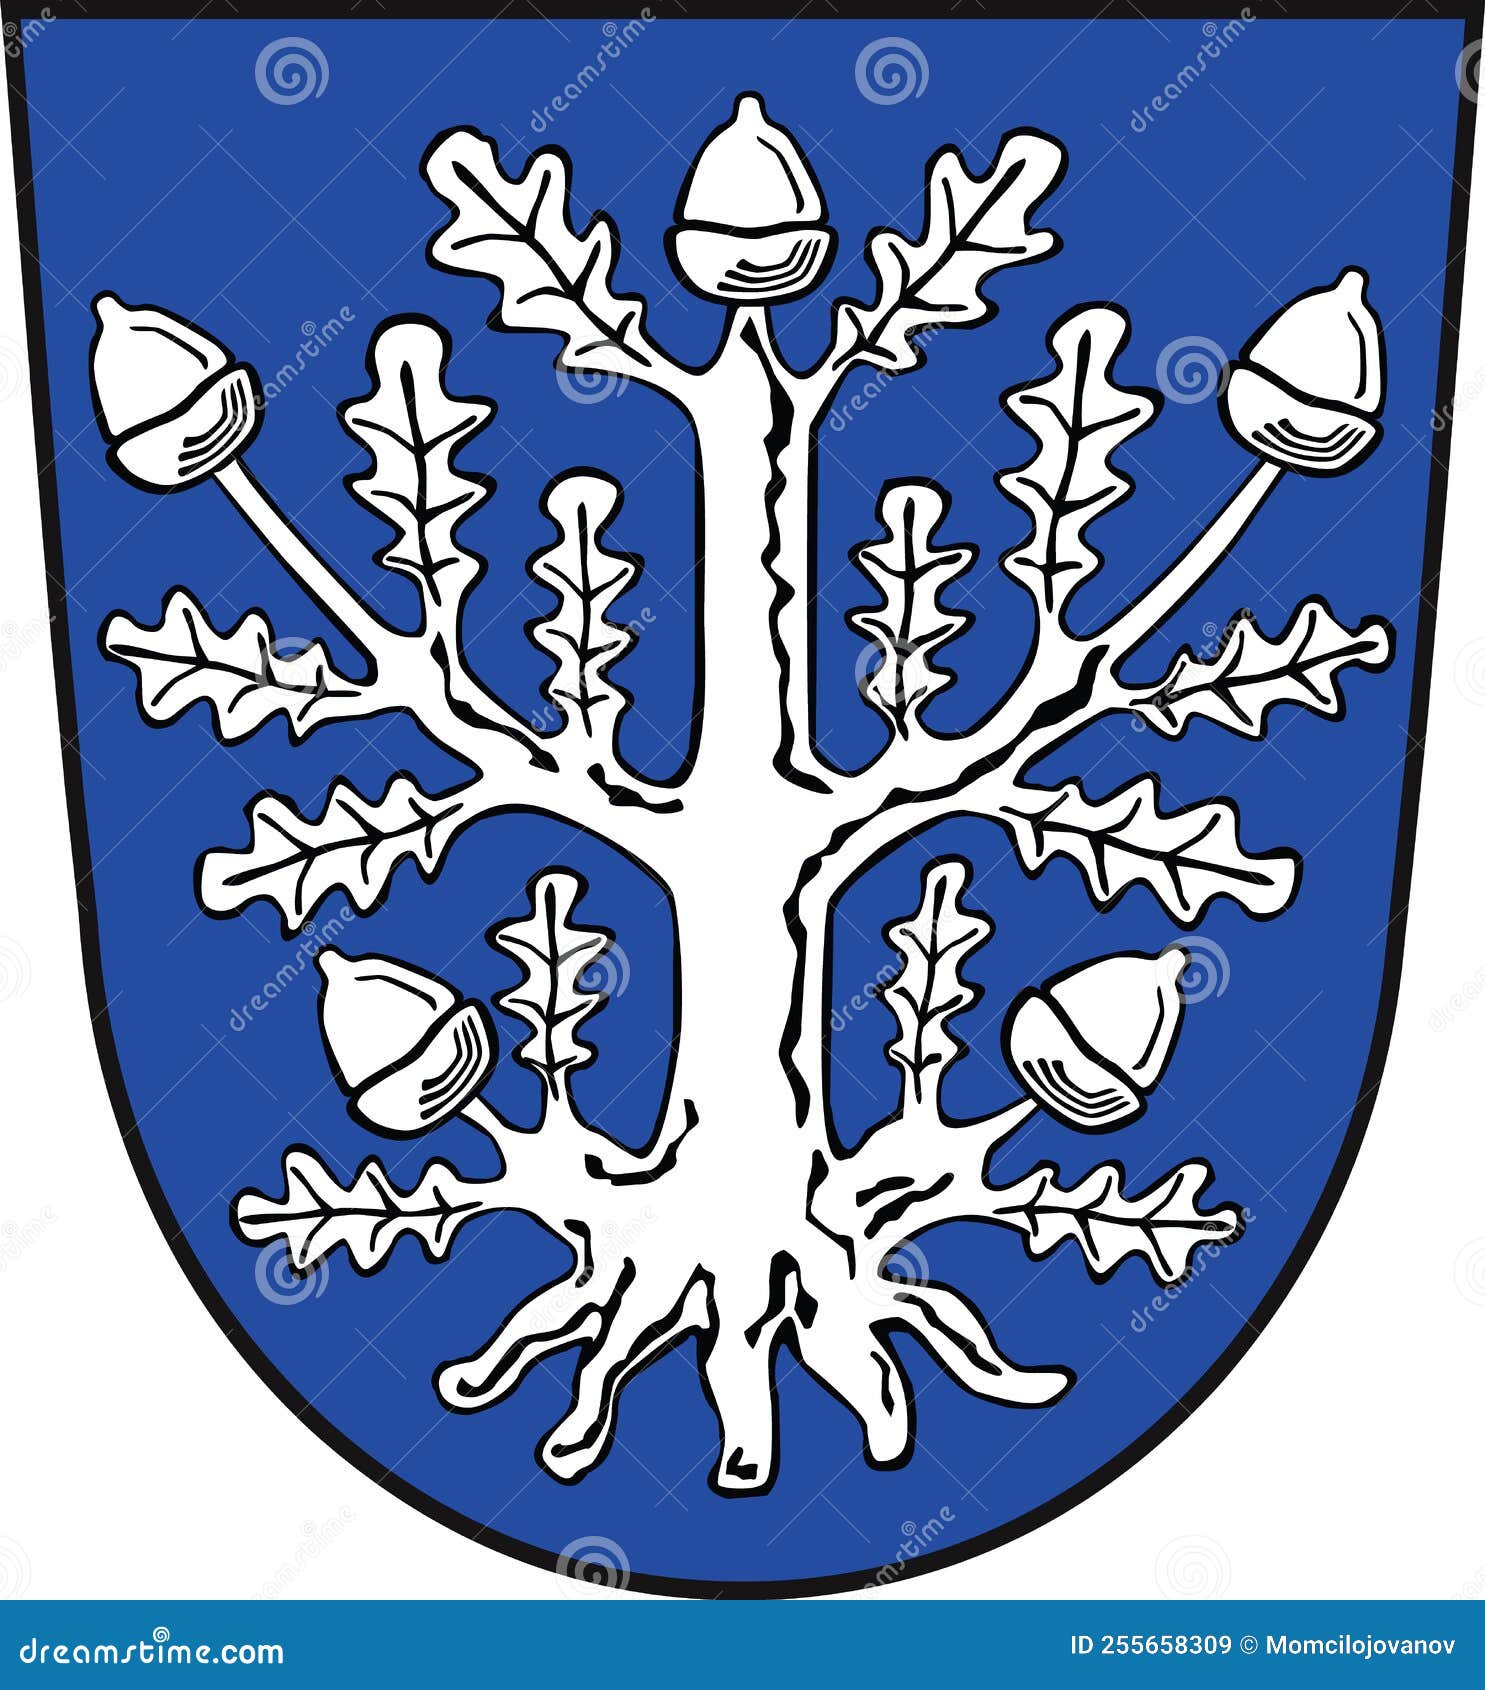 coat of arms of offenbach am main, germany